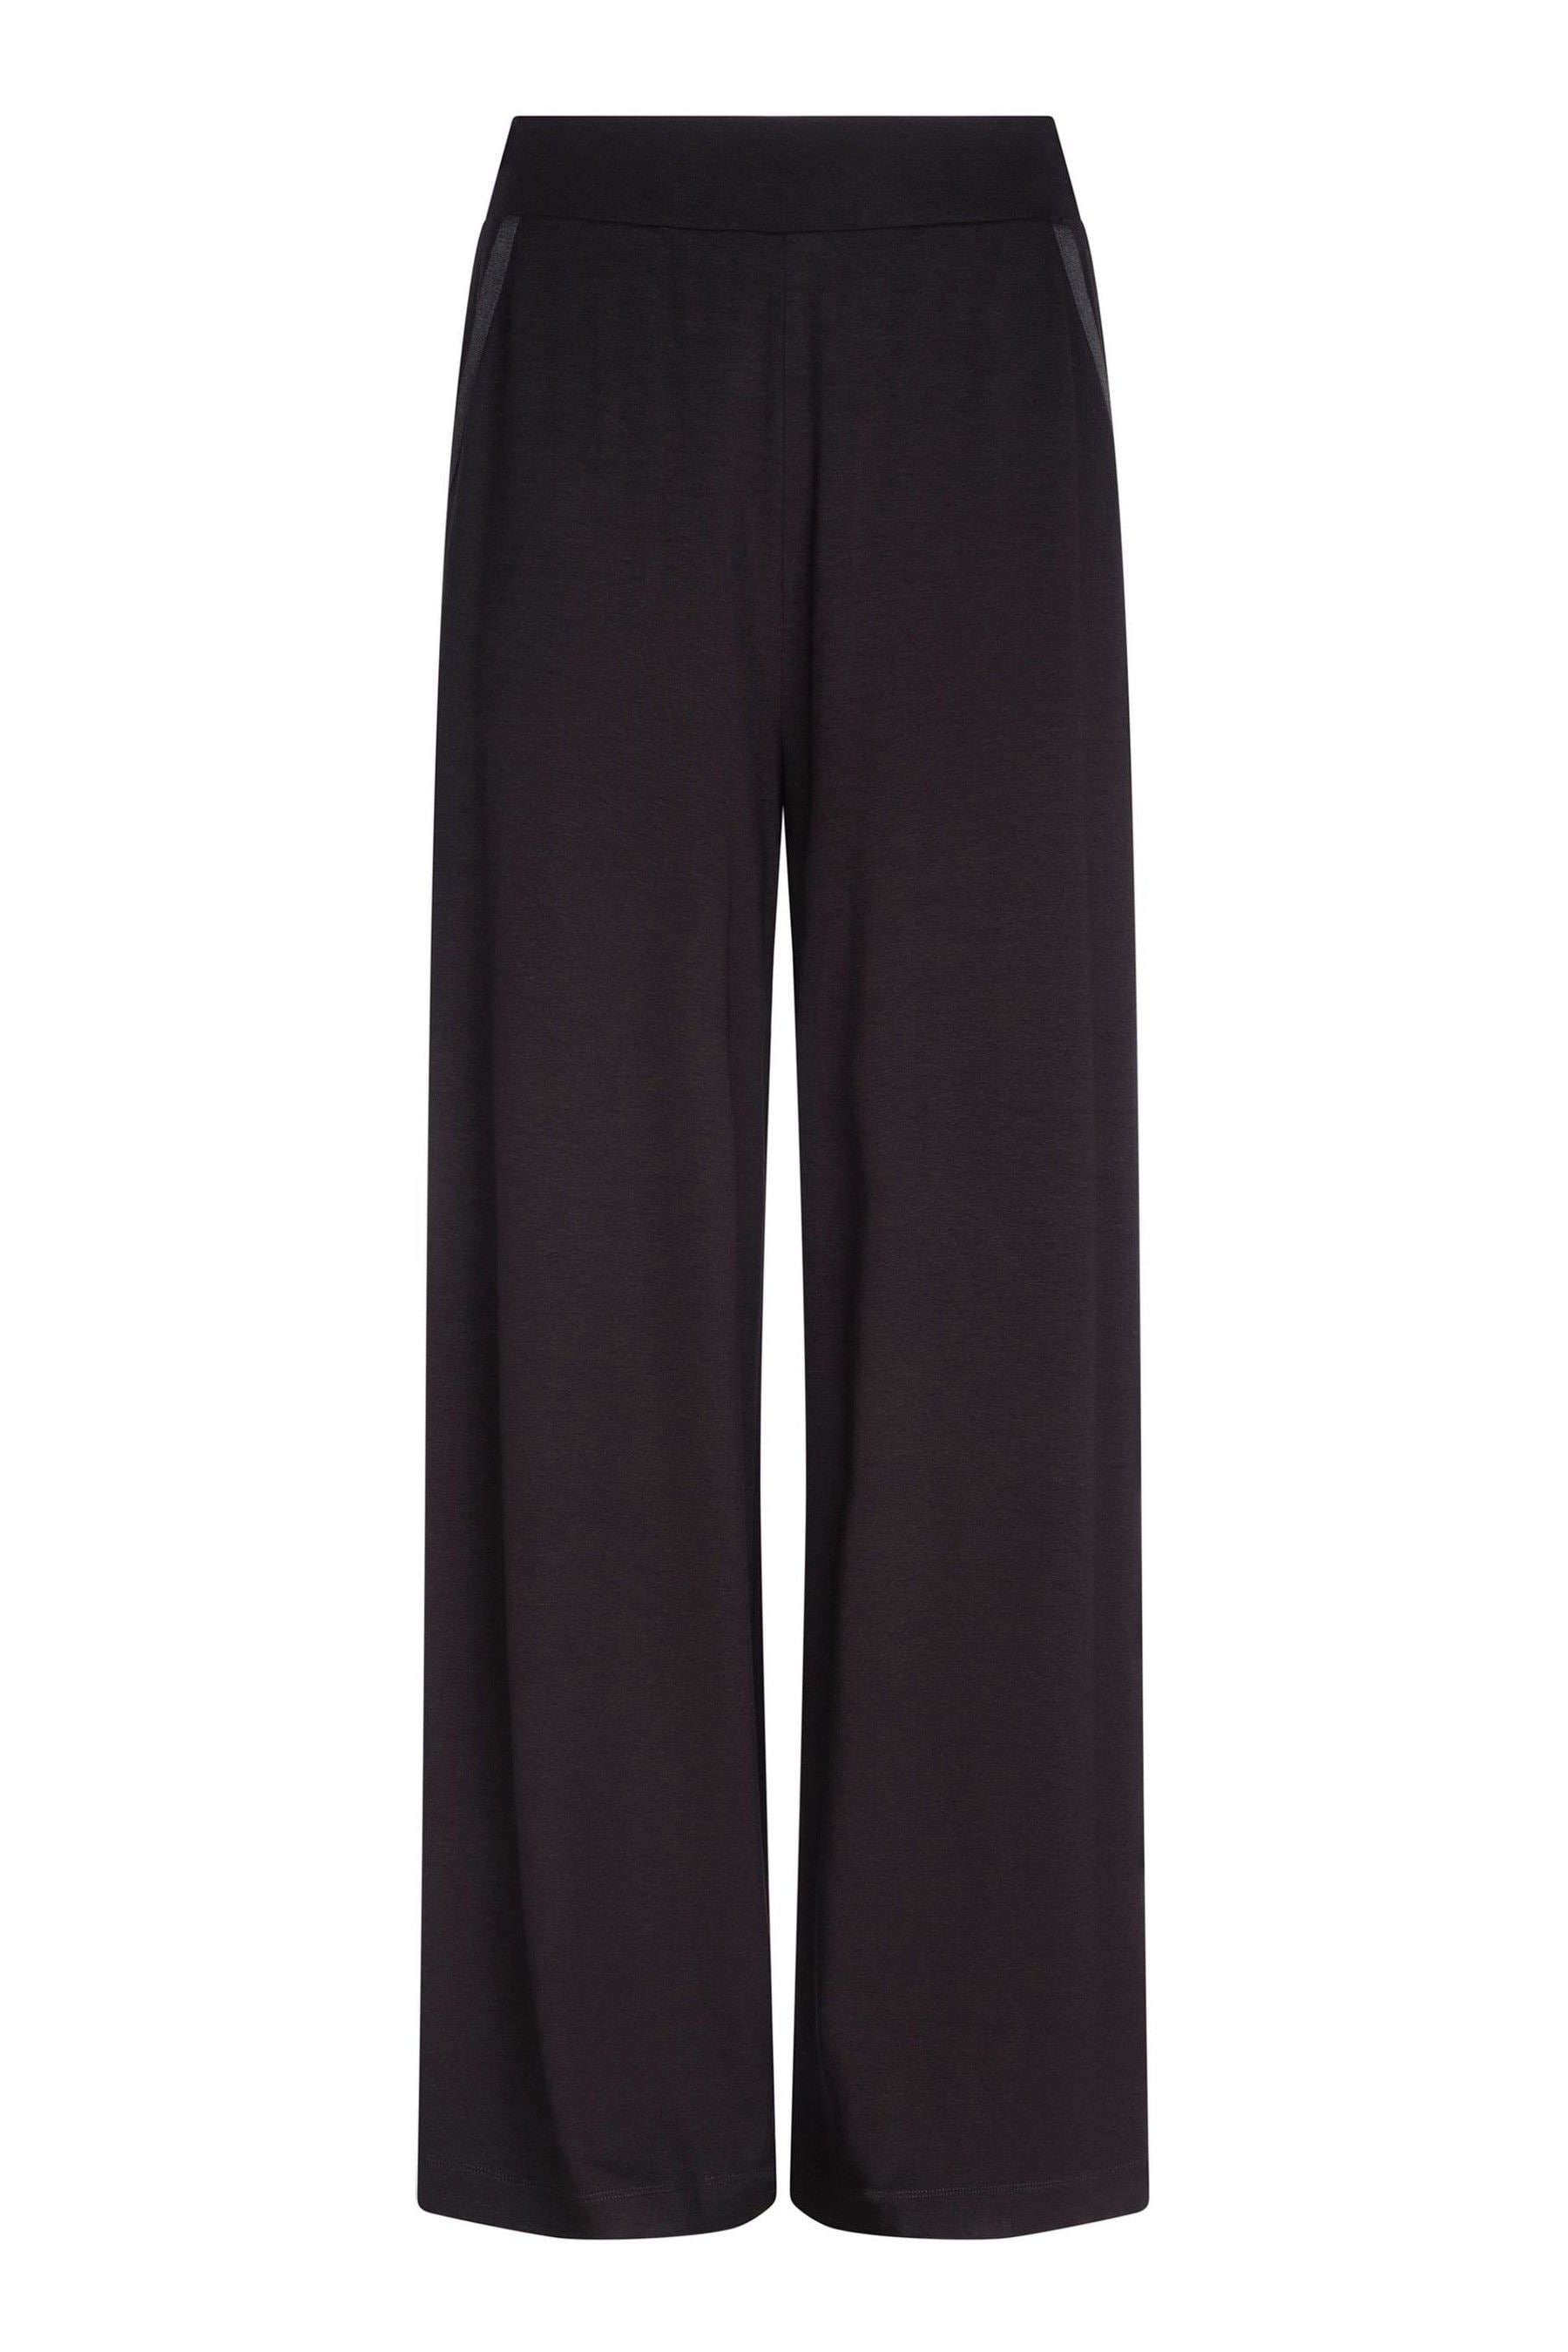 Buy Mint Velvet Black Palazzo Wide Trousers from the Next UK online shop